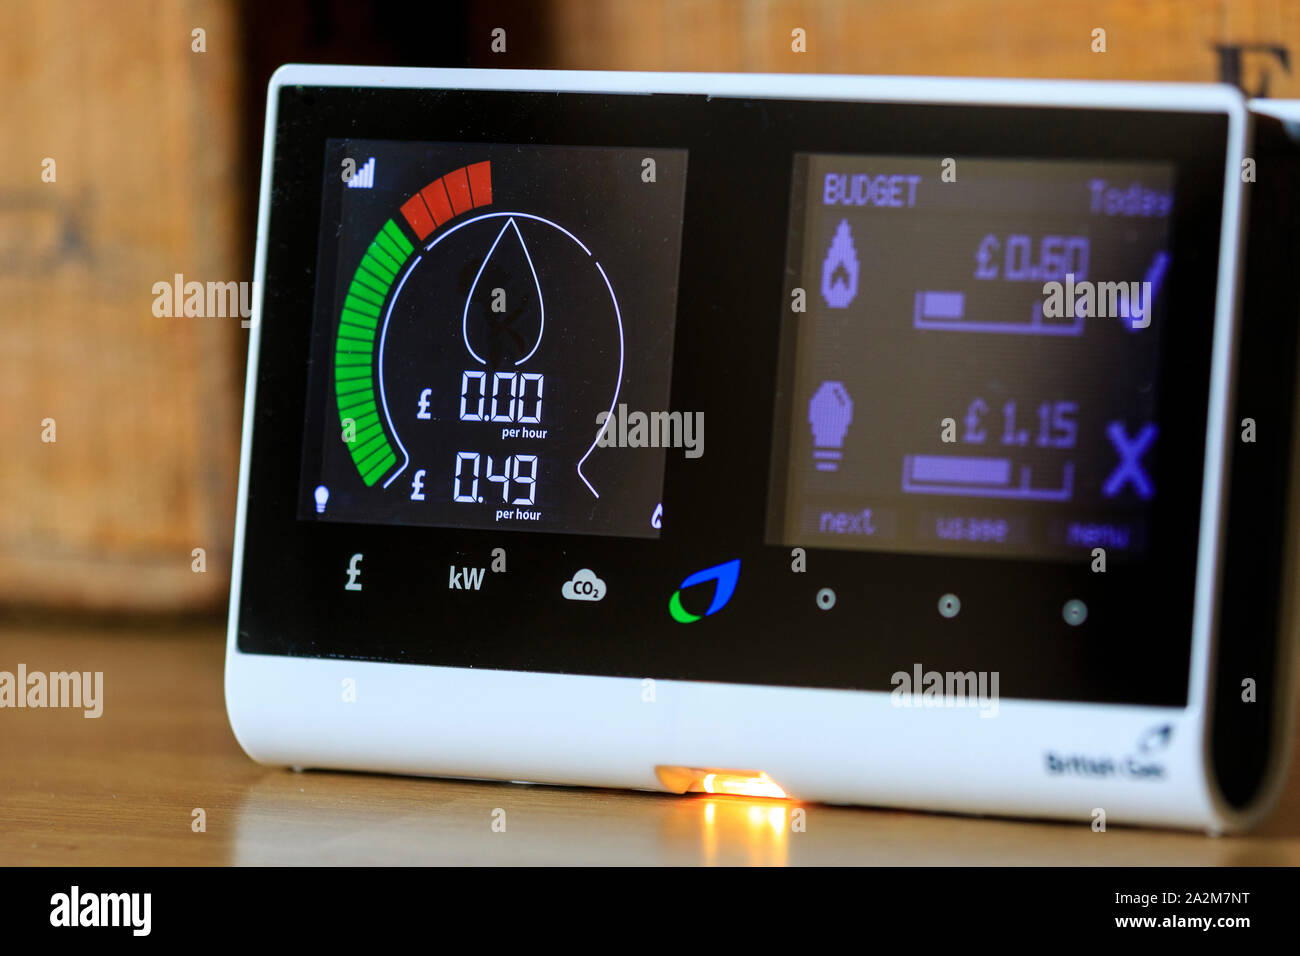 Household British Gas smart meter on worktop to monitor electric and gas consumption thereby saving money for the resident. Shows high energy use. Stock Photo